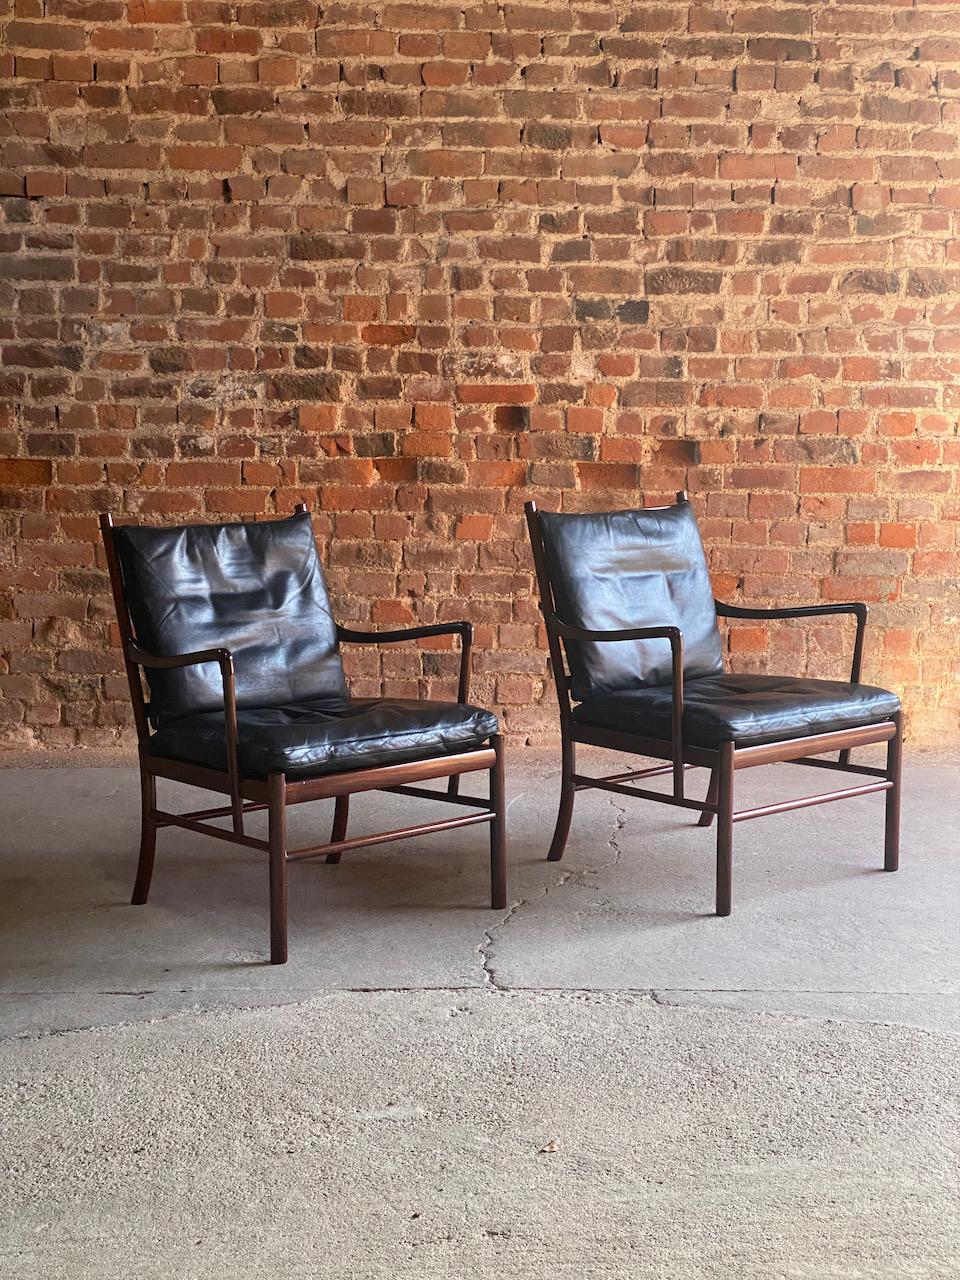 Ole Wanscher Model 149 Rosewood Colonial Chairs Pair by Poul Jeppesens, Denmark 4